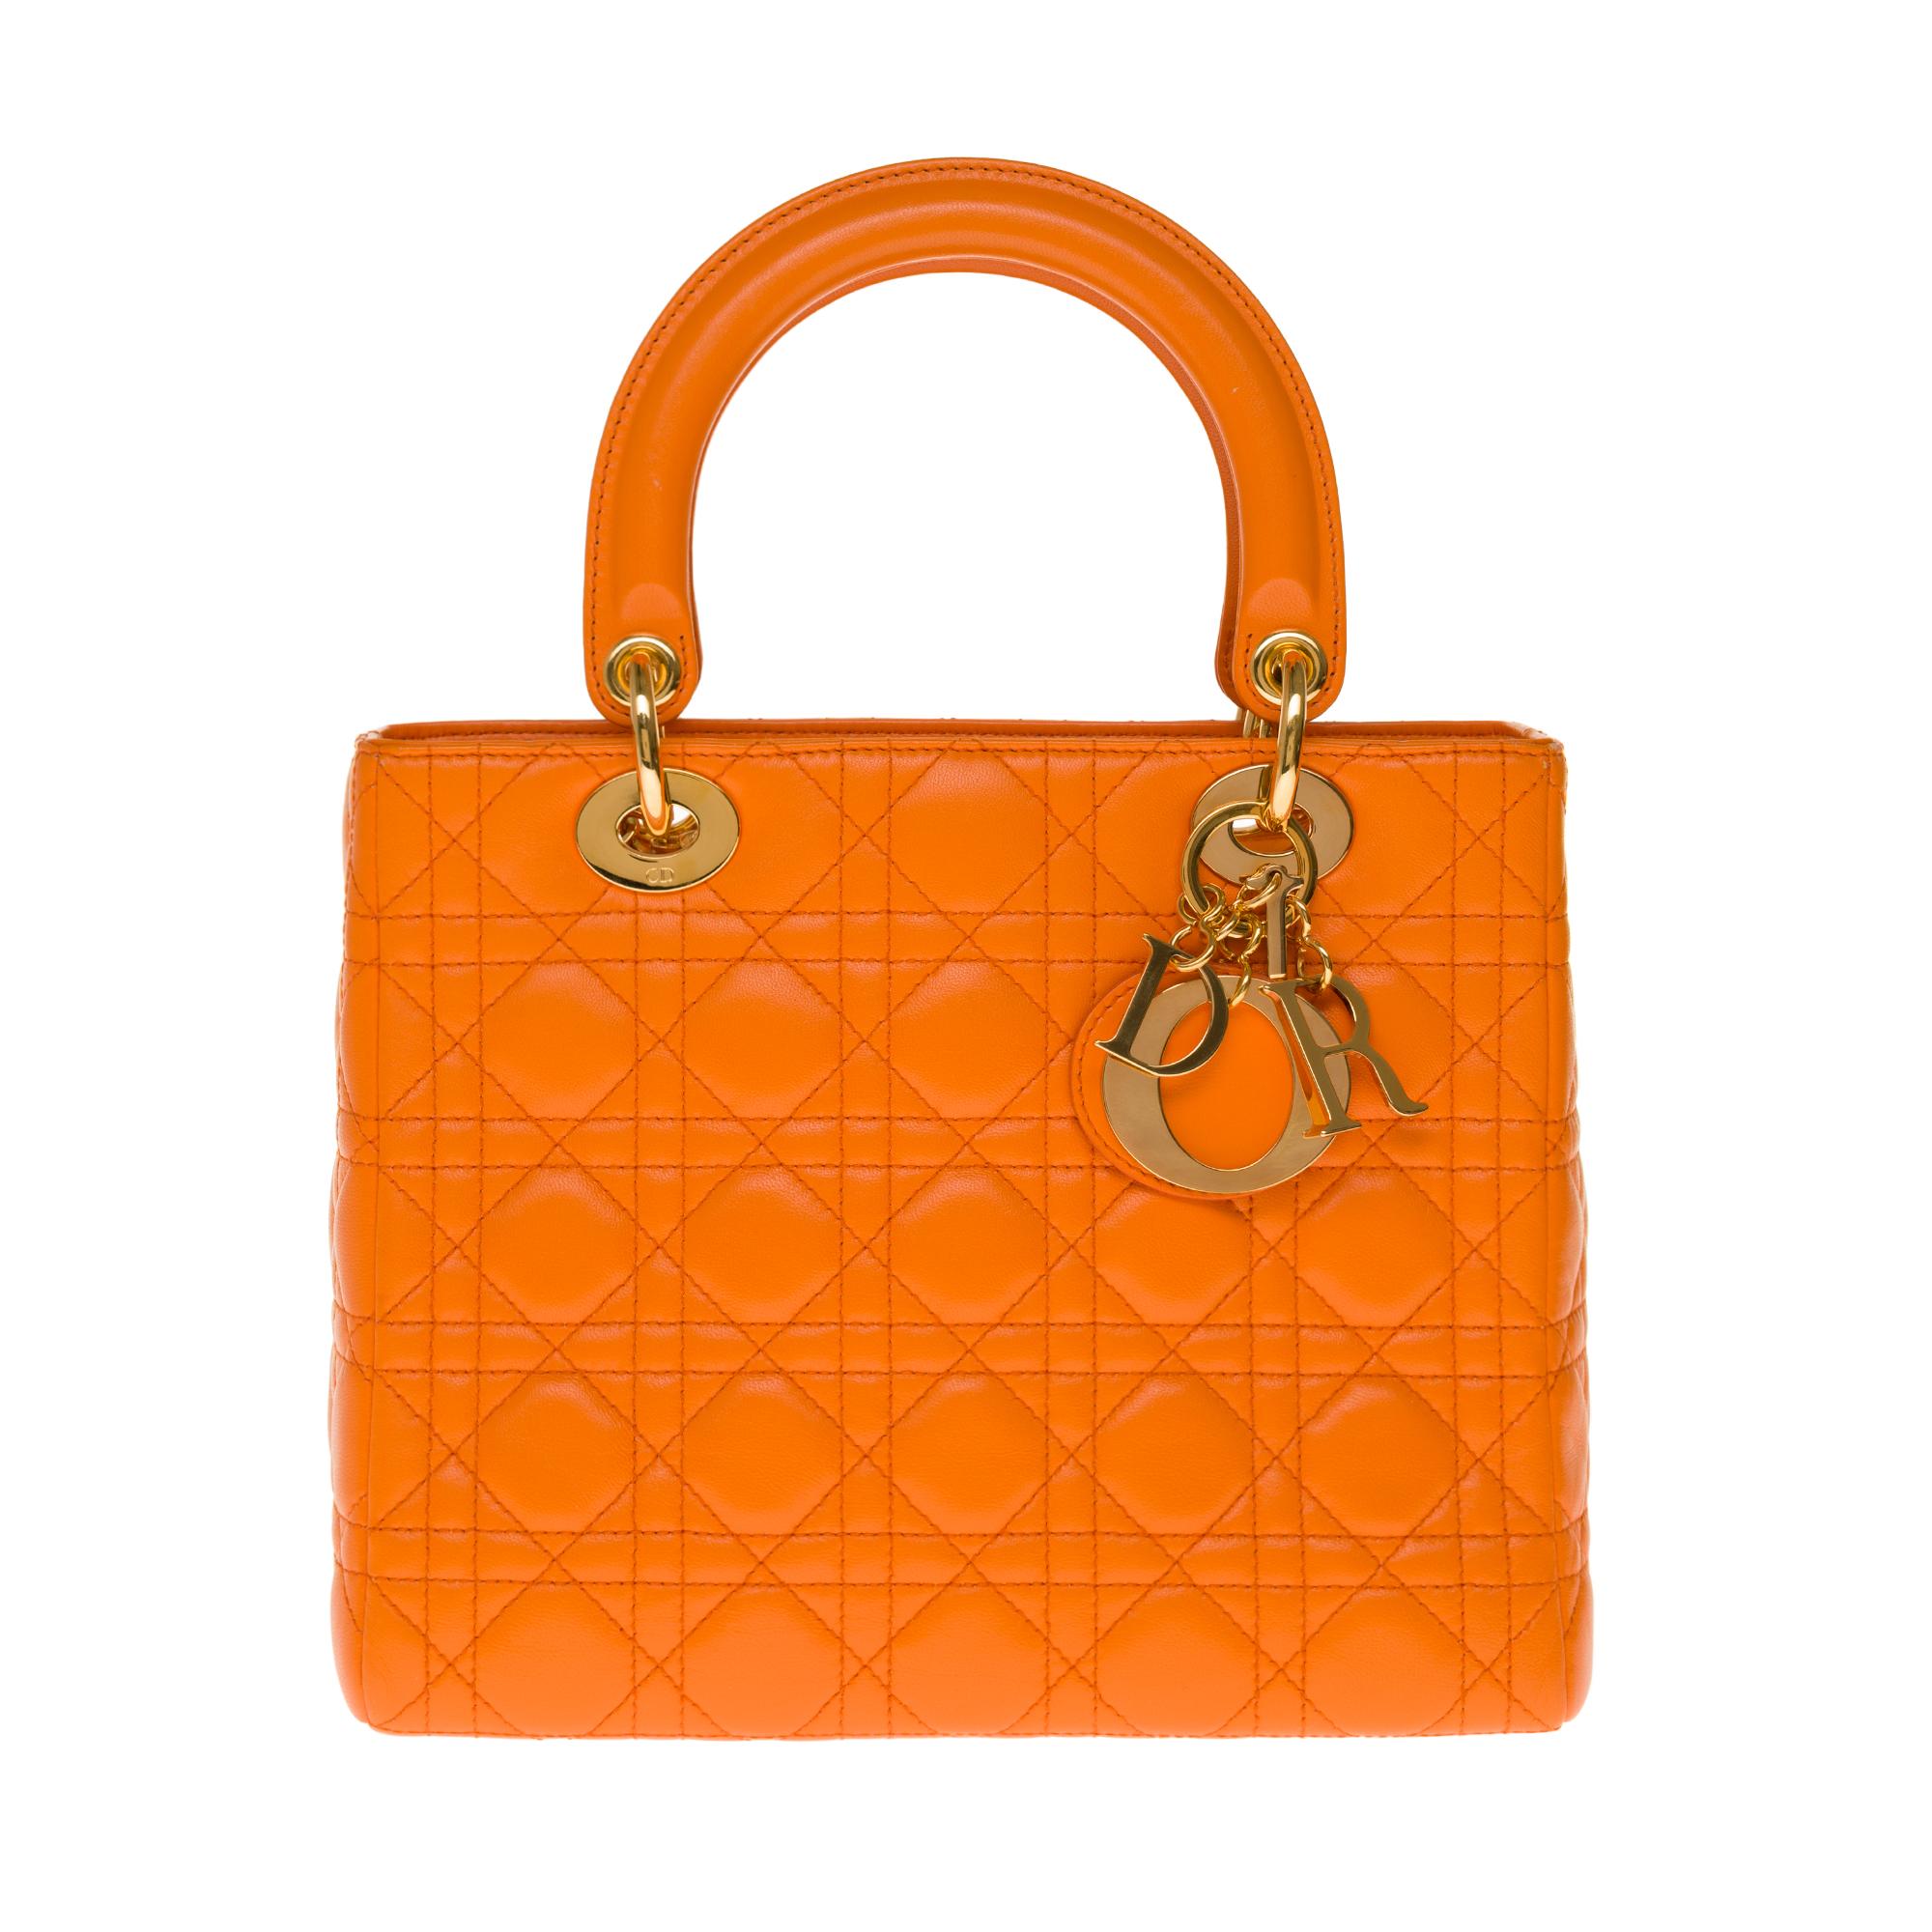 Very chic shoulder bag Dior Lady Dior medium model in leather cannage color pumpkin, gold metal hardware, double handle in orange leather, handle removable shoulder strap in orange leather allowing a hand or shoulder or shoulder strap.

It’s a zip